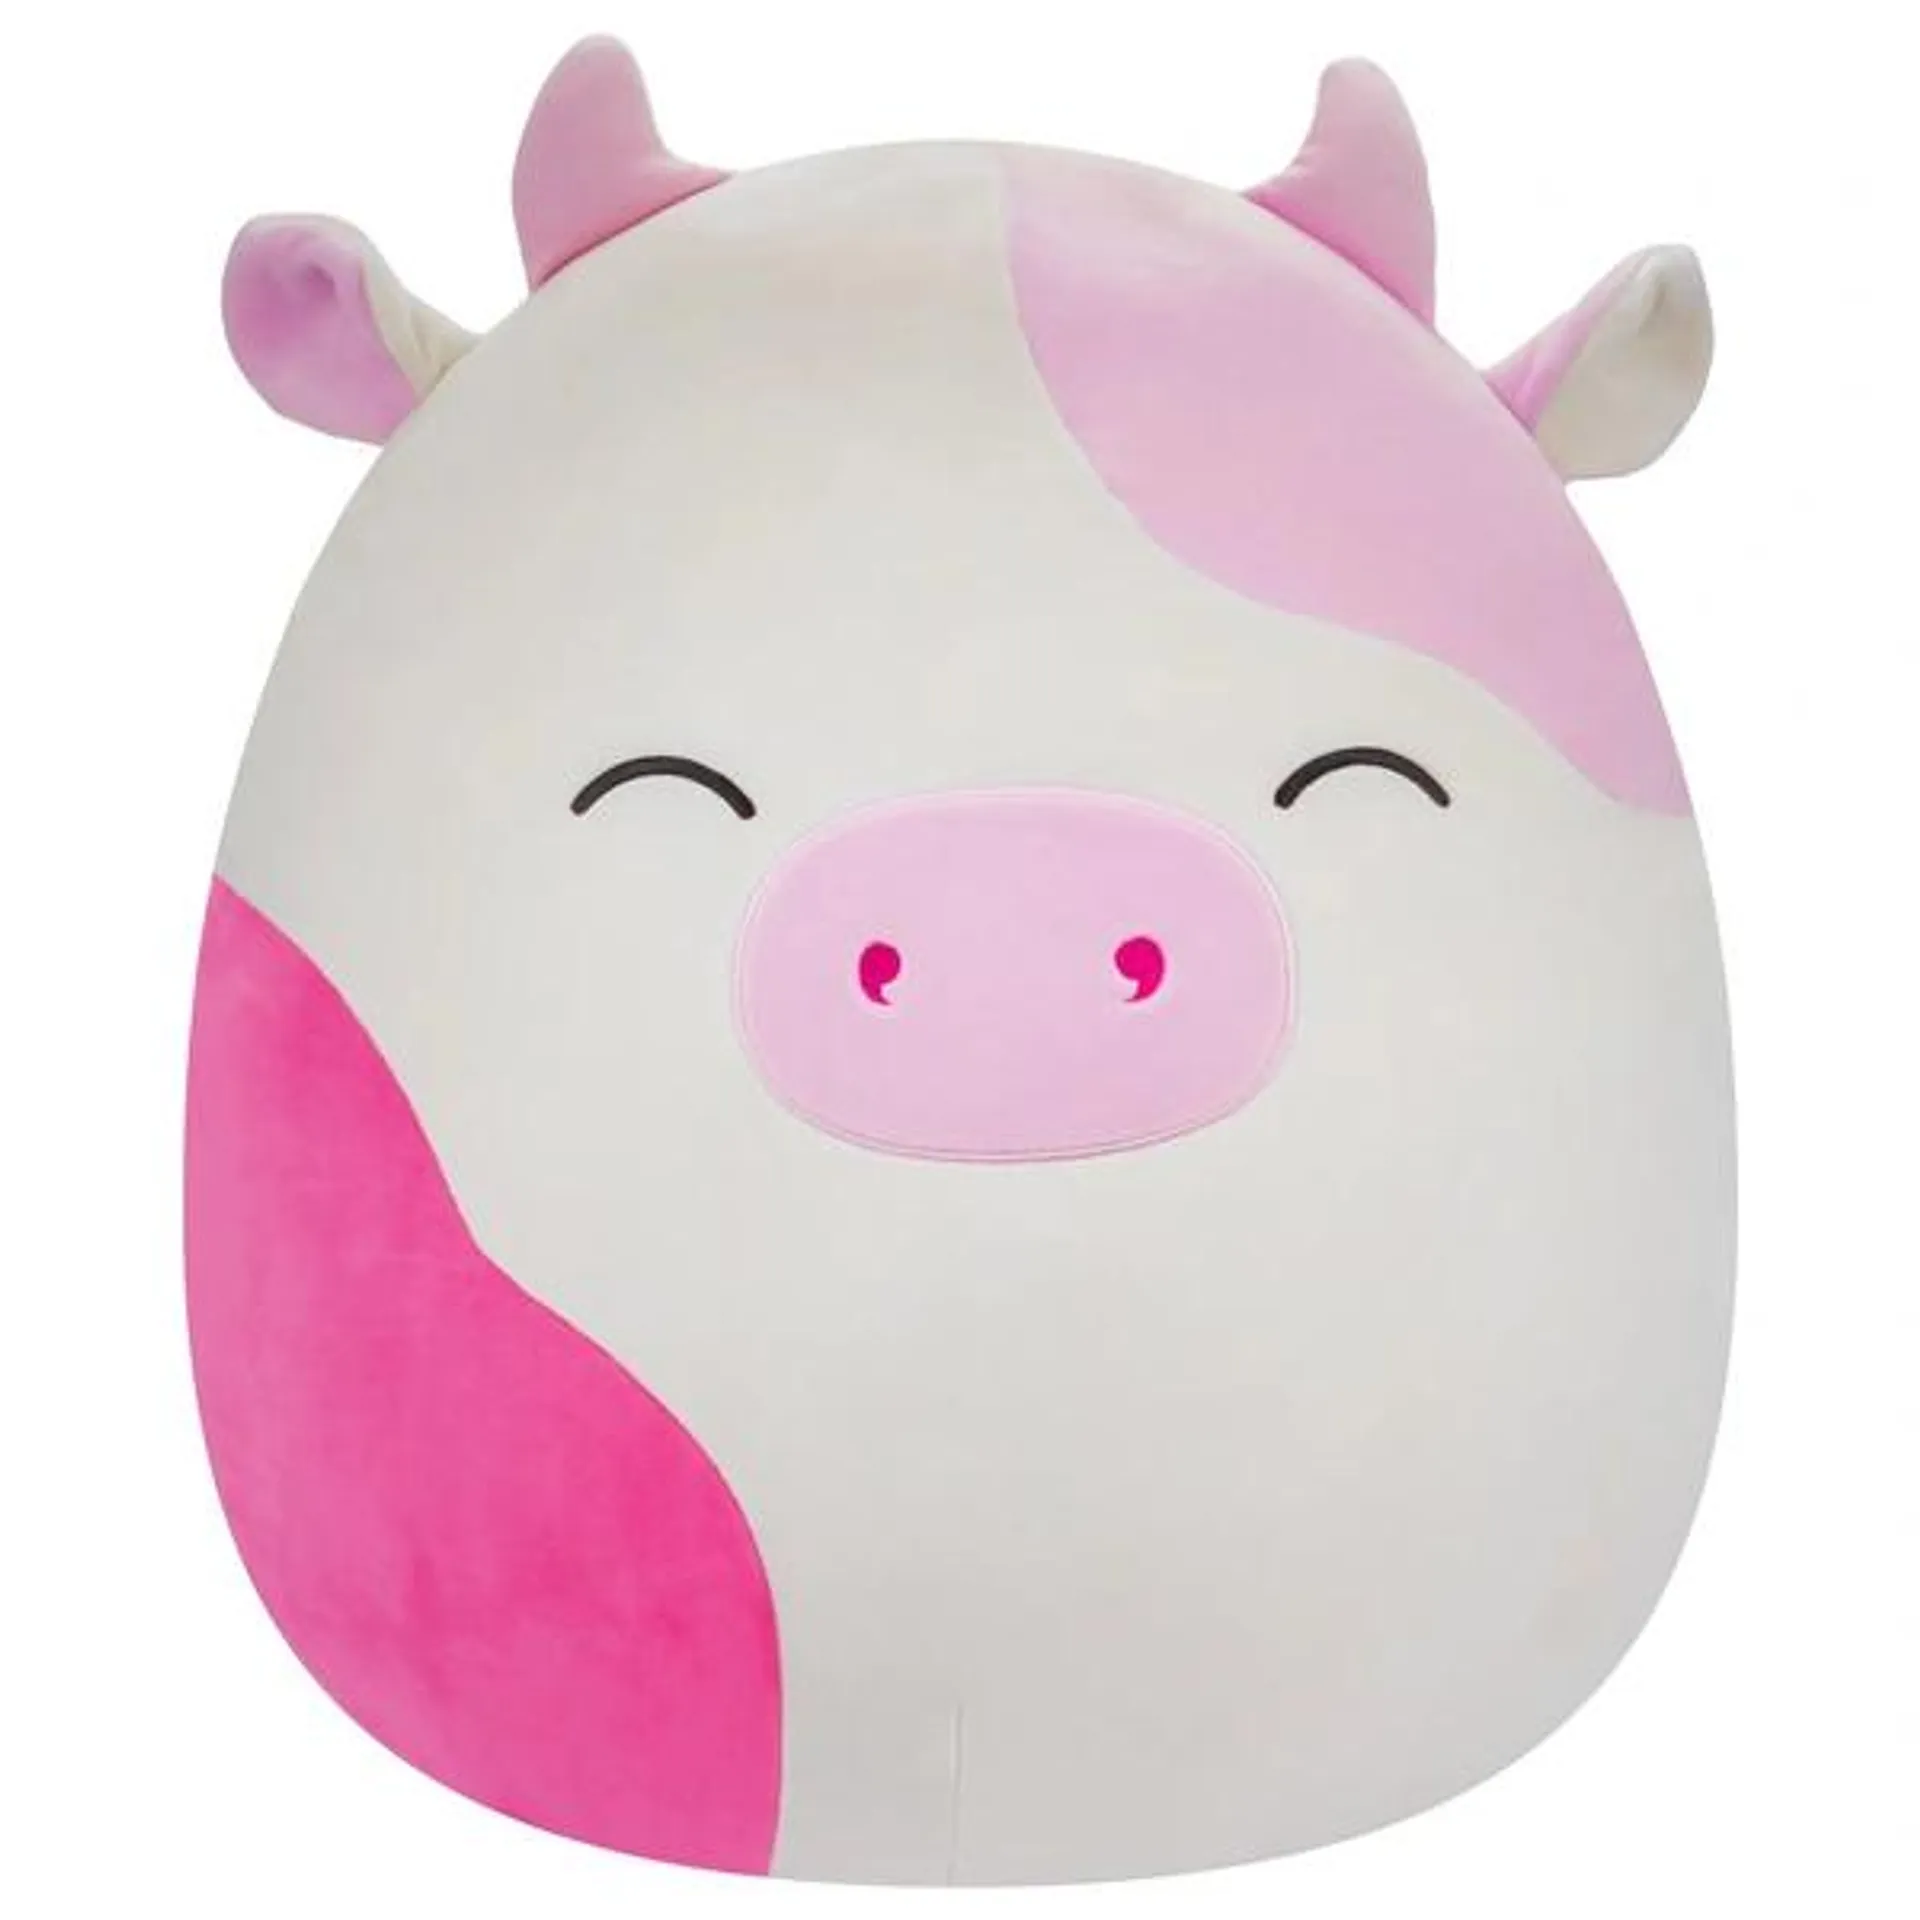 Original Squishmallows 40cm Caedyn the Pink Cow Soft Toy